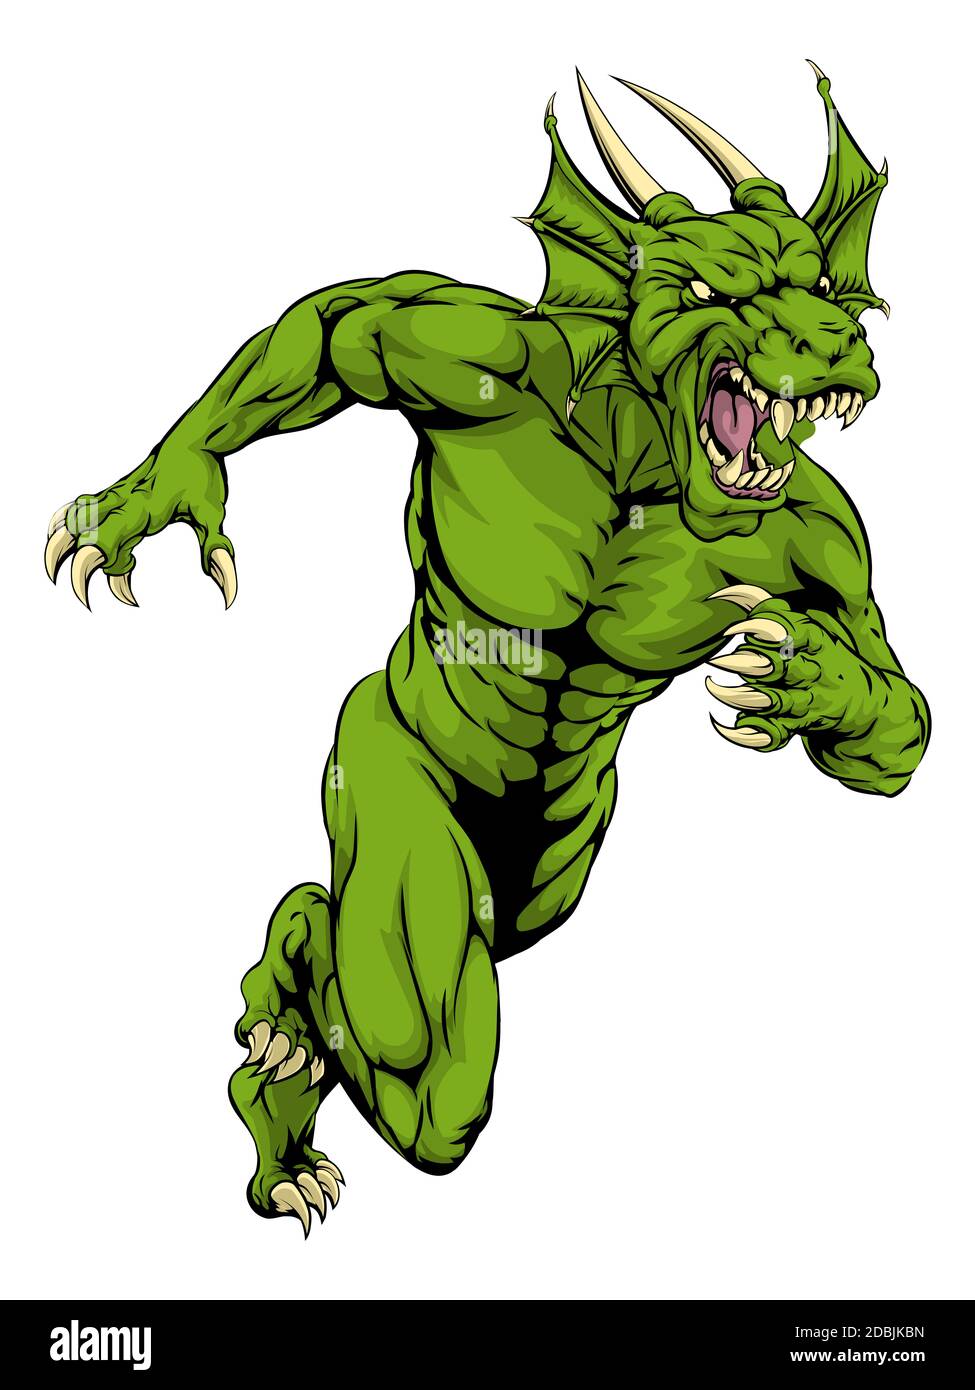 An illustration of a mean tough looking Dragon sports mascot sprinting Stock Photo